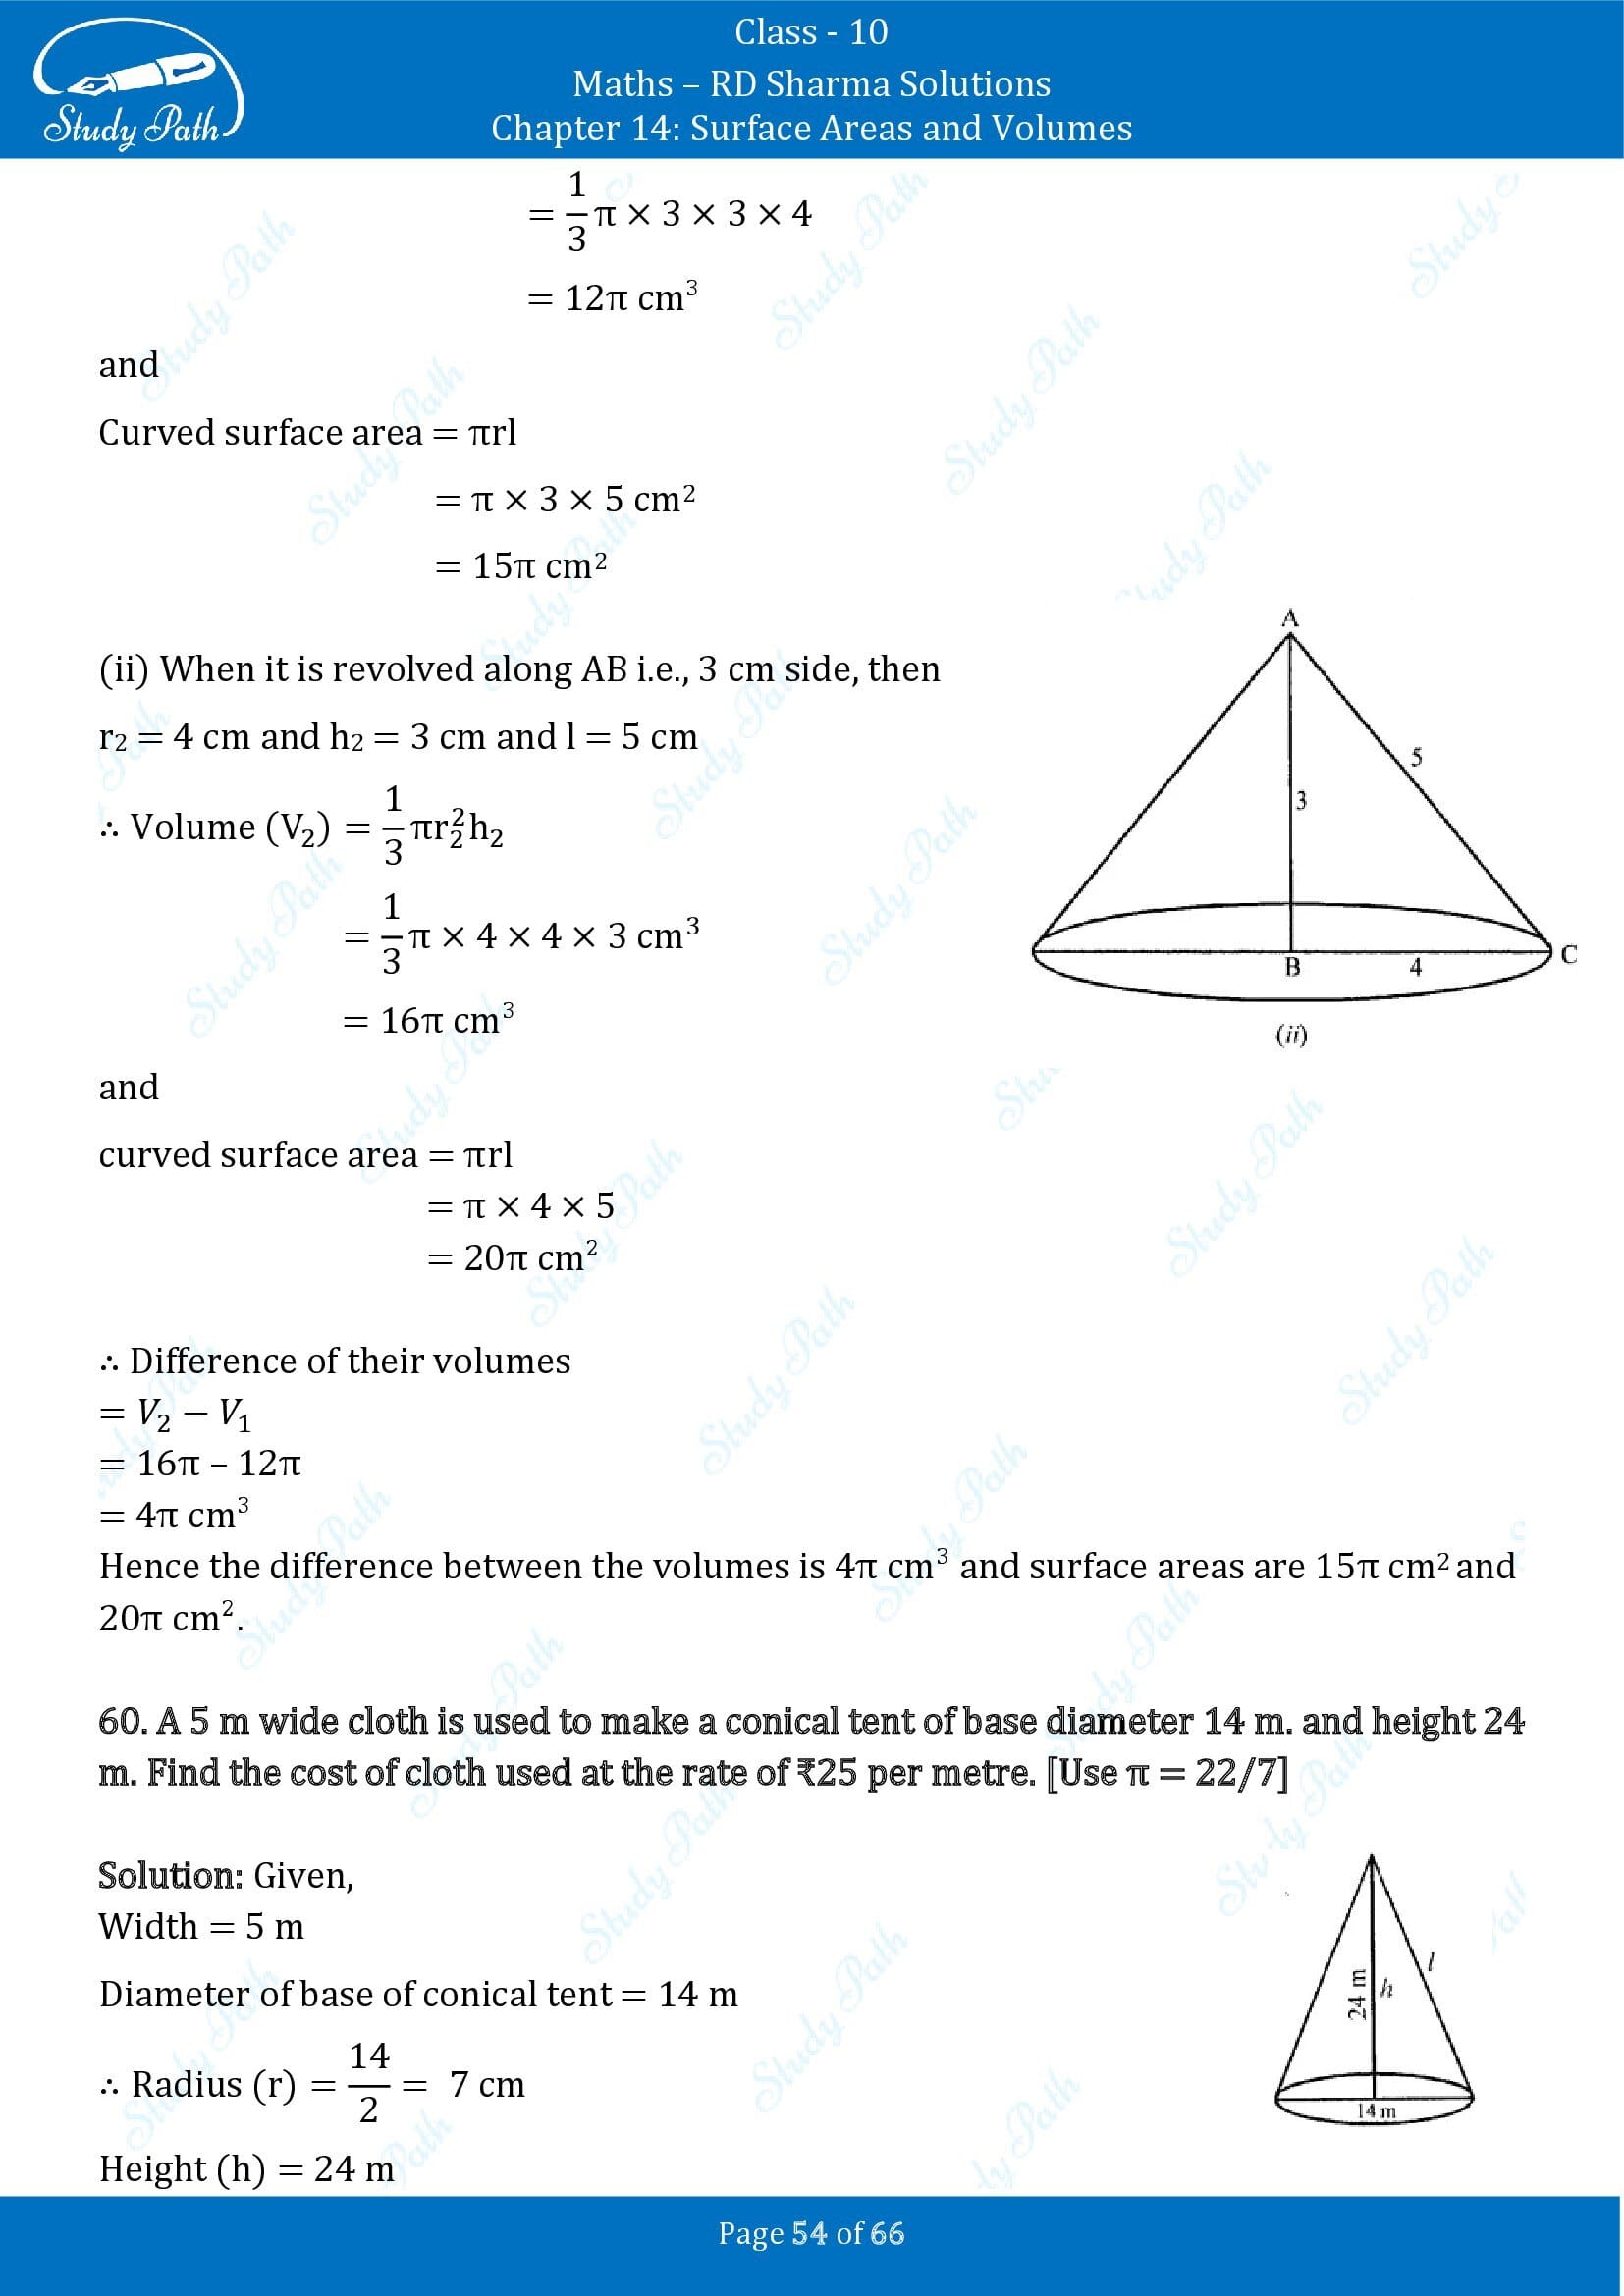 RD Sharma Solutions Class 10 Chapter 14 Surface Areas and Volumes Exercise 14.1 00054